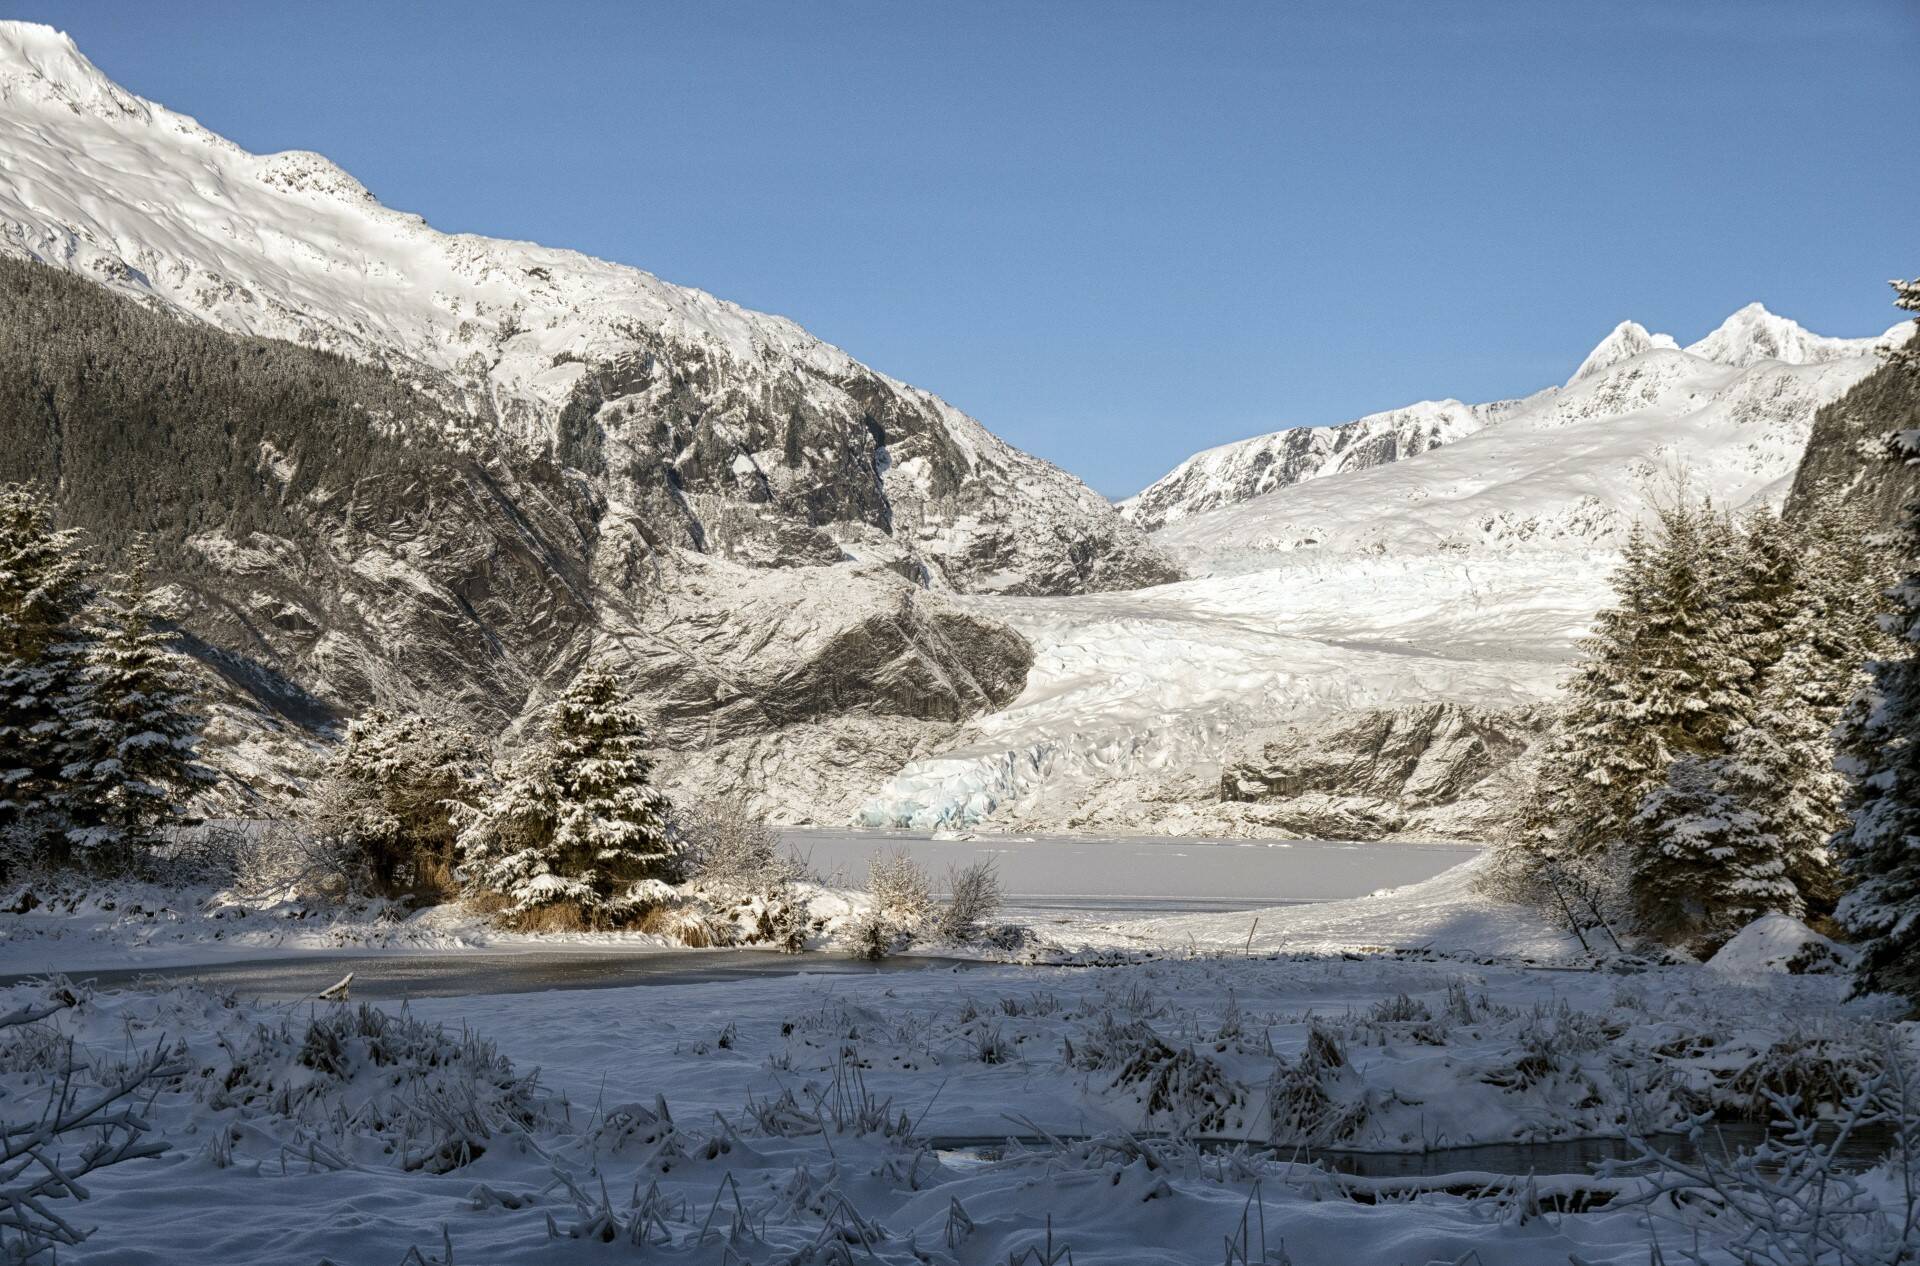 The Mendenhall Glacier with Steep Creek in the foreground on Jan. 9. (Courtesy Photo / Kenneth Gill, gillfoto)